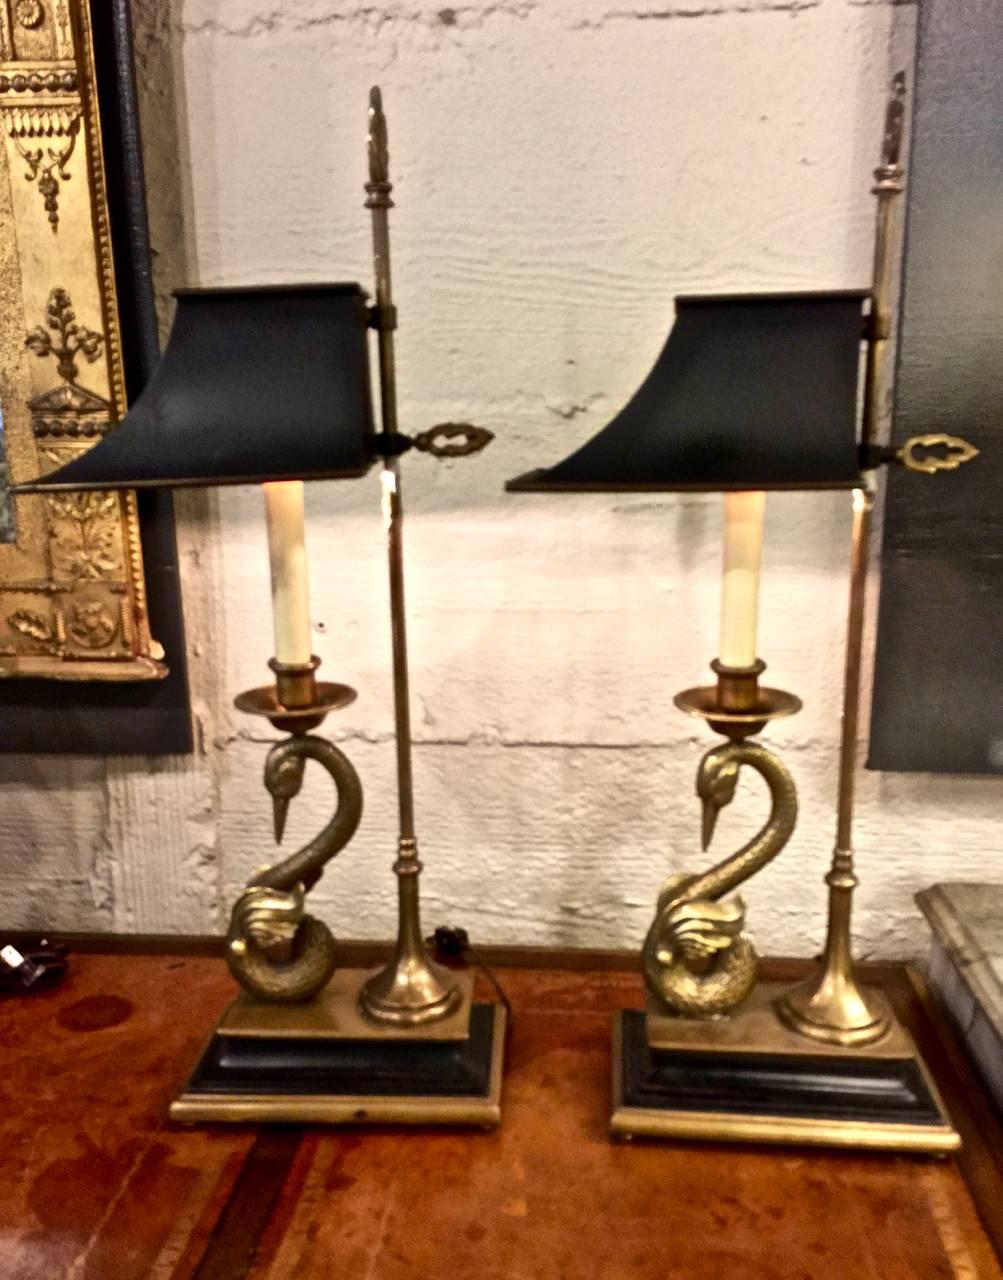 20th Century Pair of Chapman Empire-Style Swan Lamps